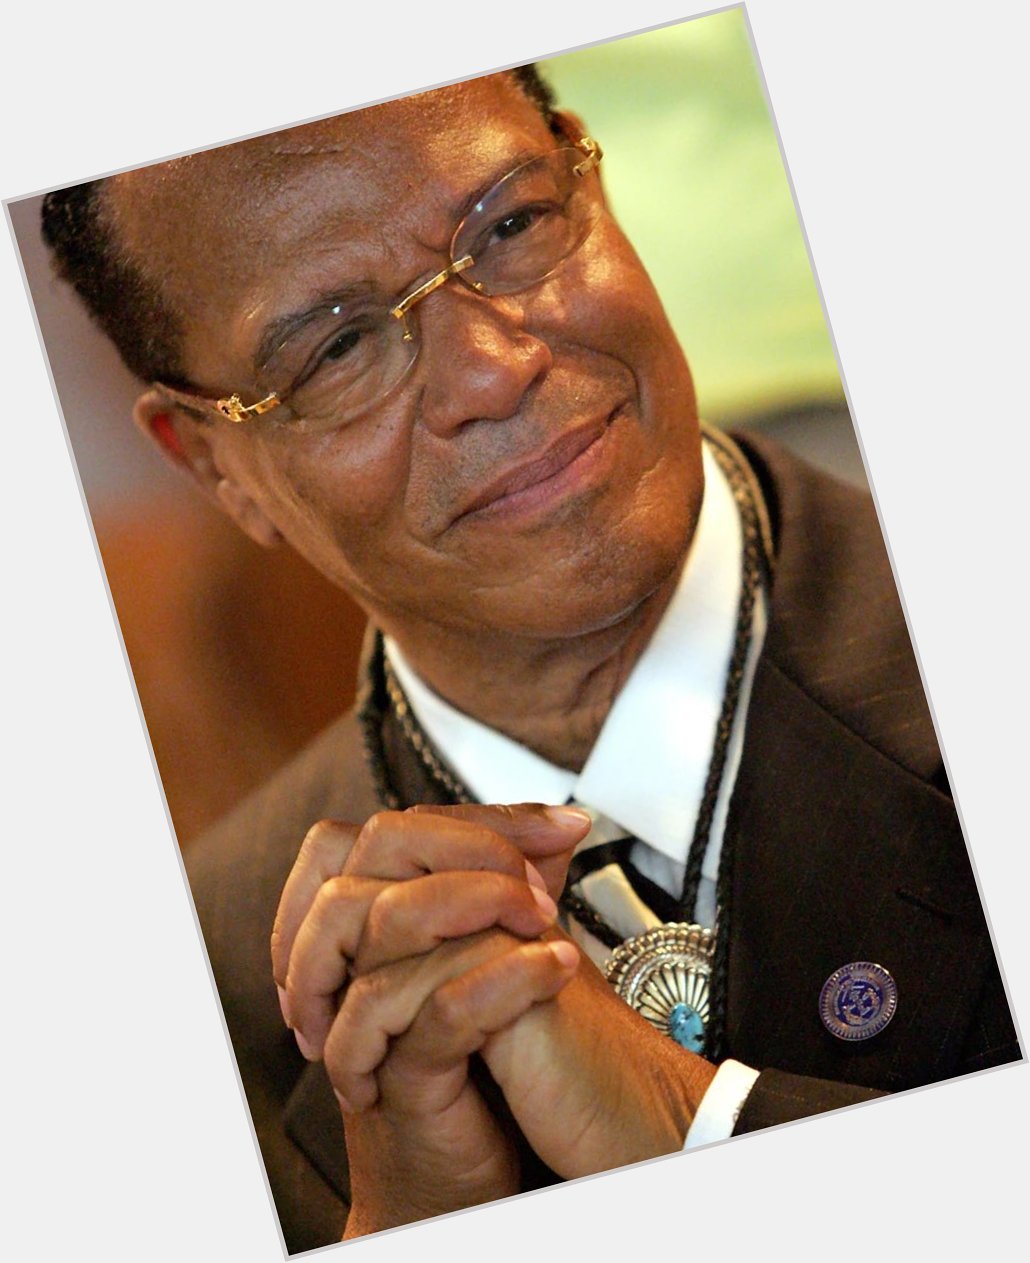 Happy Birthday to a man that I respect and admire, Minister Louis Farrakhan.   